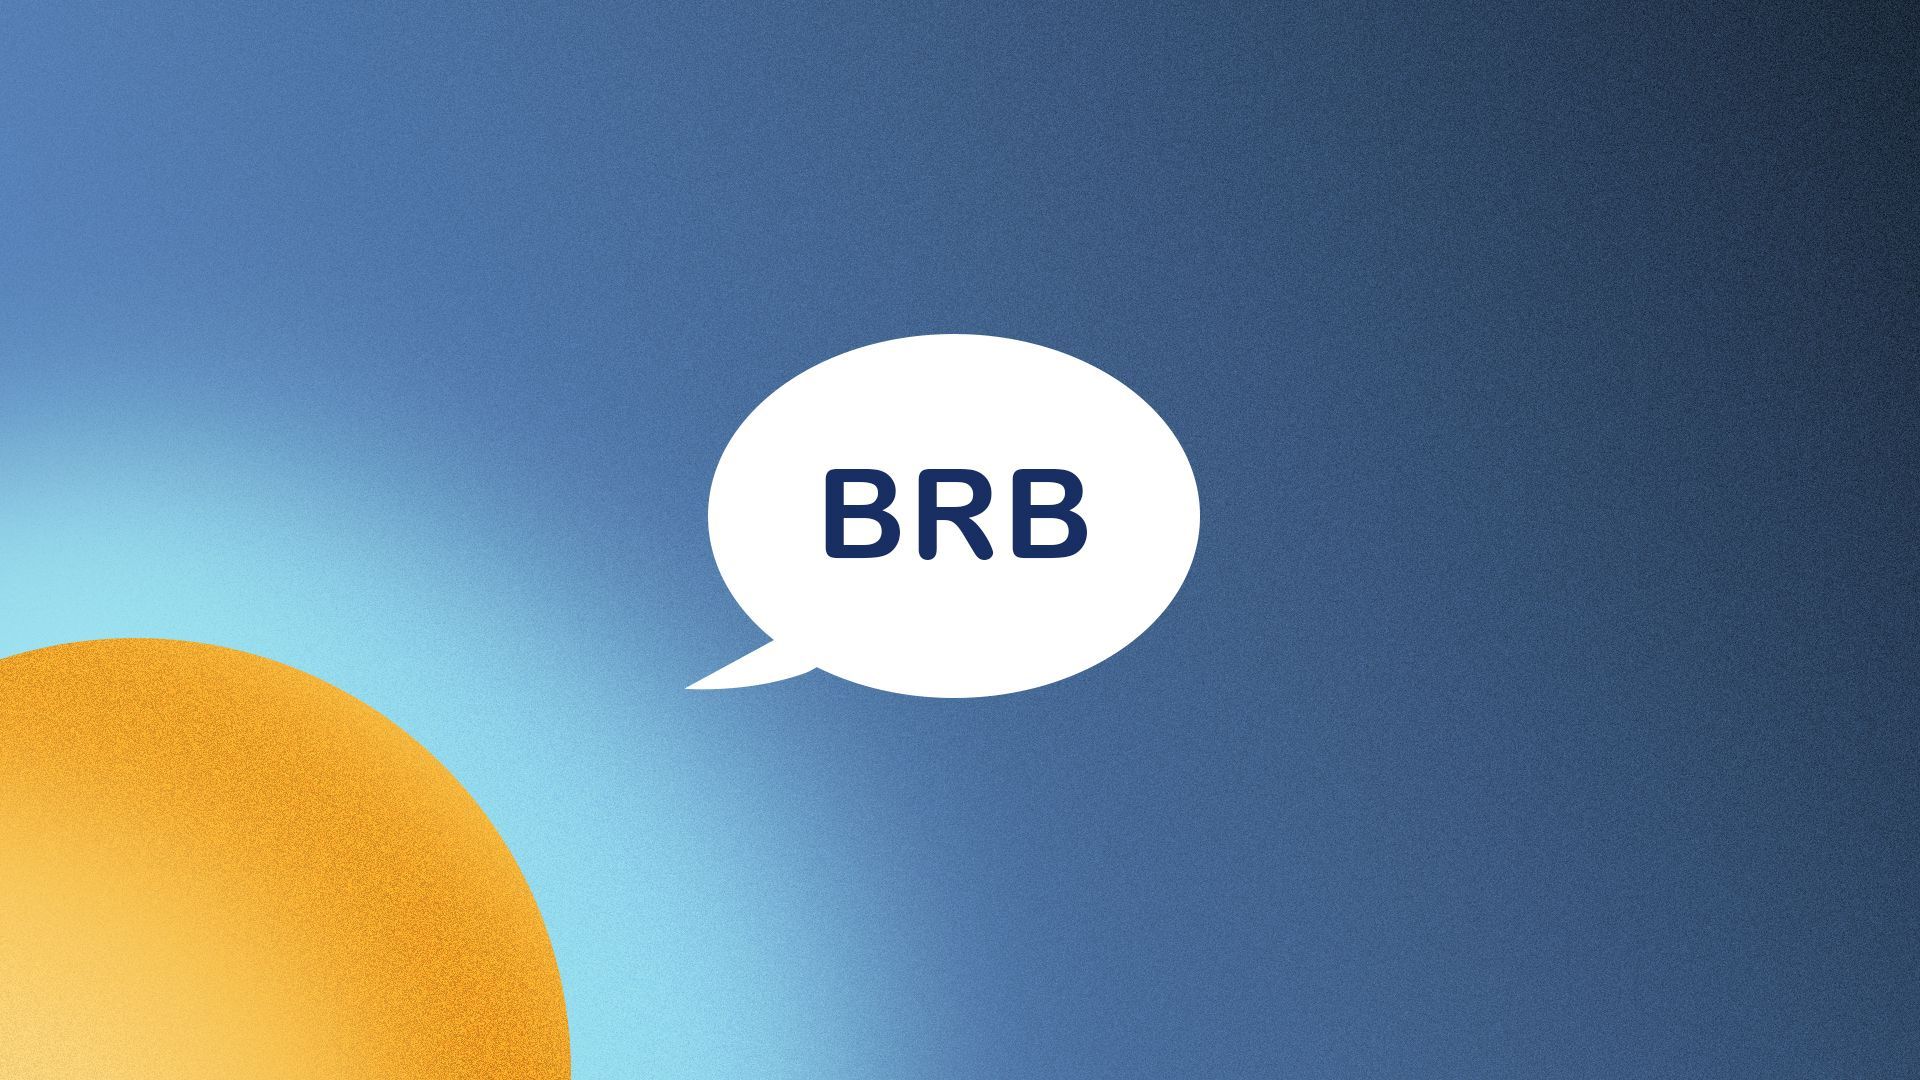 Illustration of the sun peeking from a corner with a speech bubble that reads "BRB".